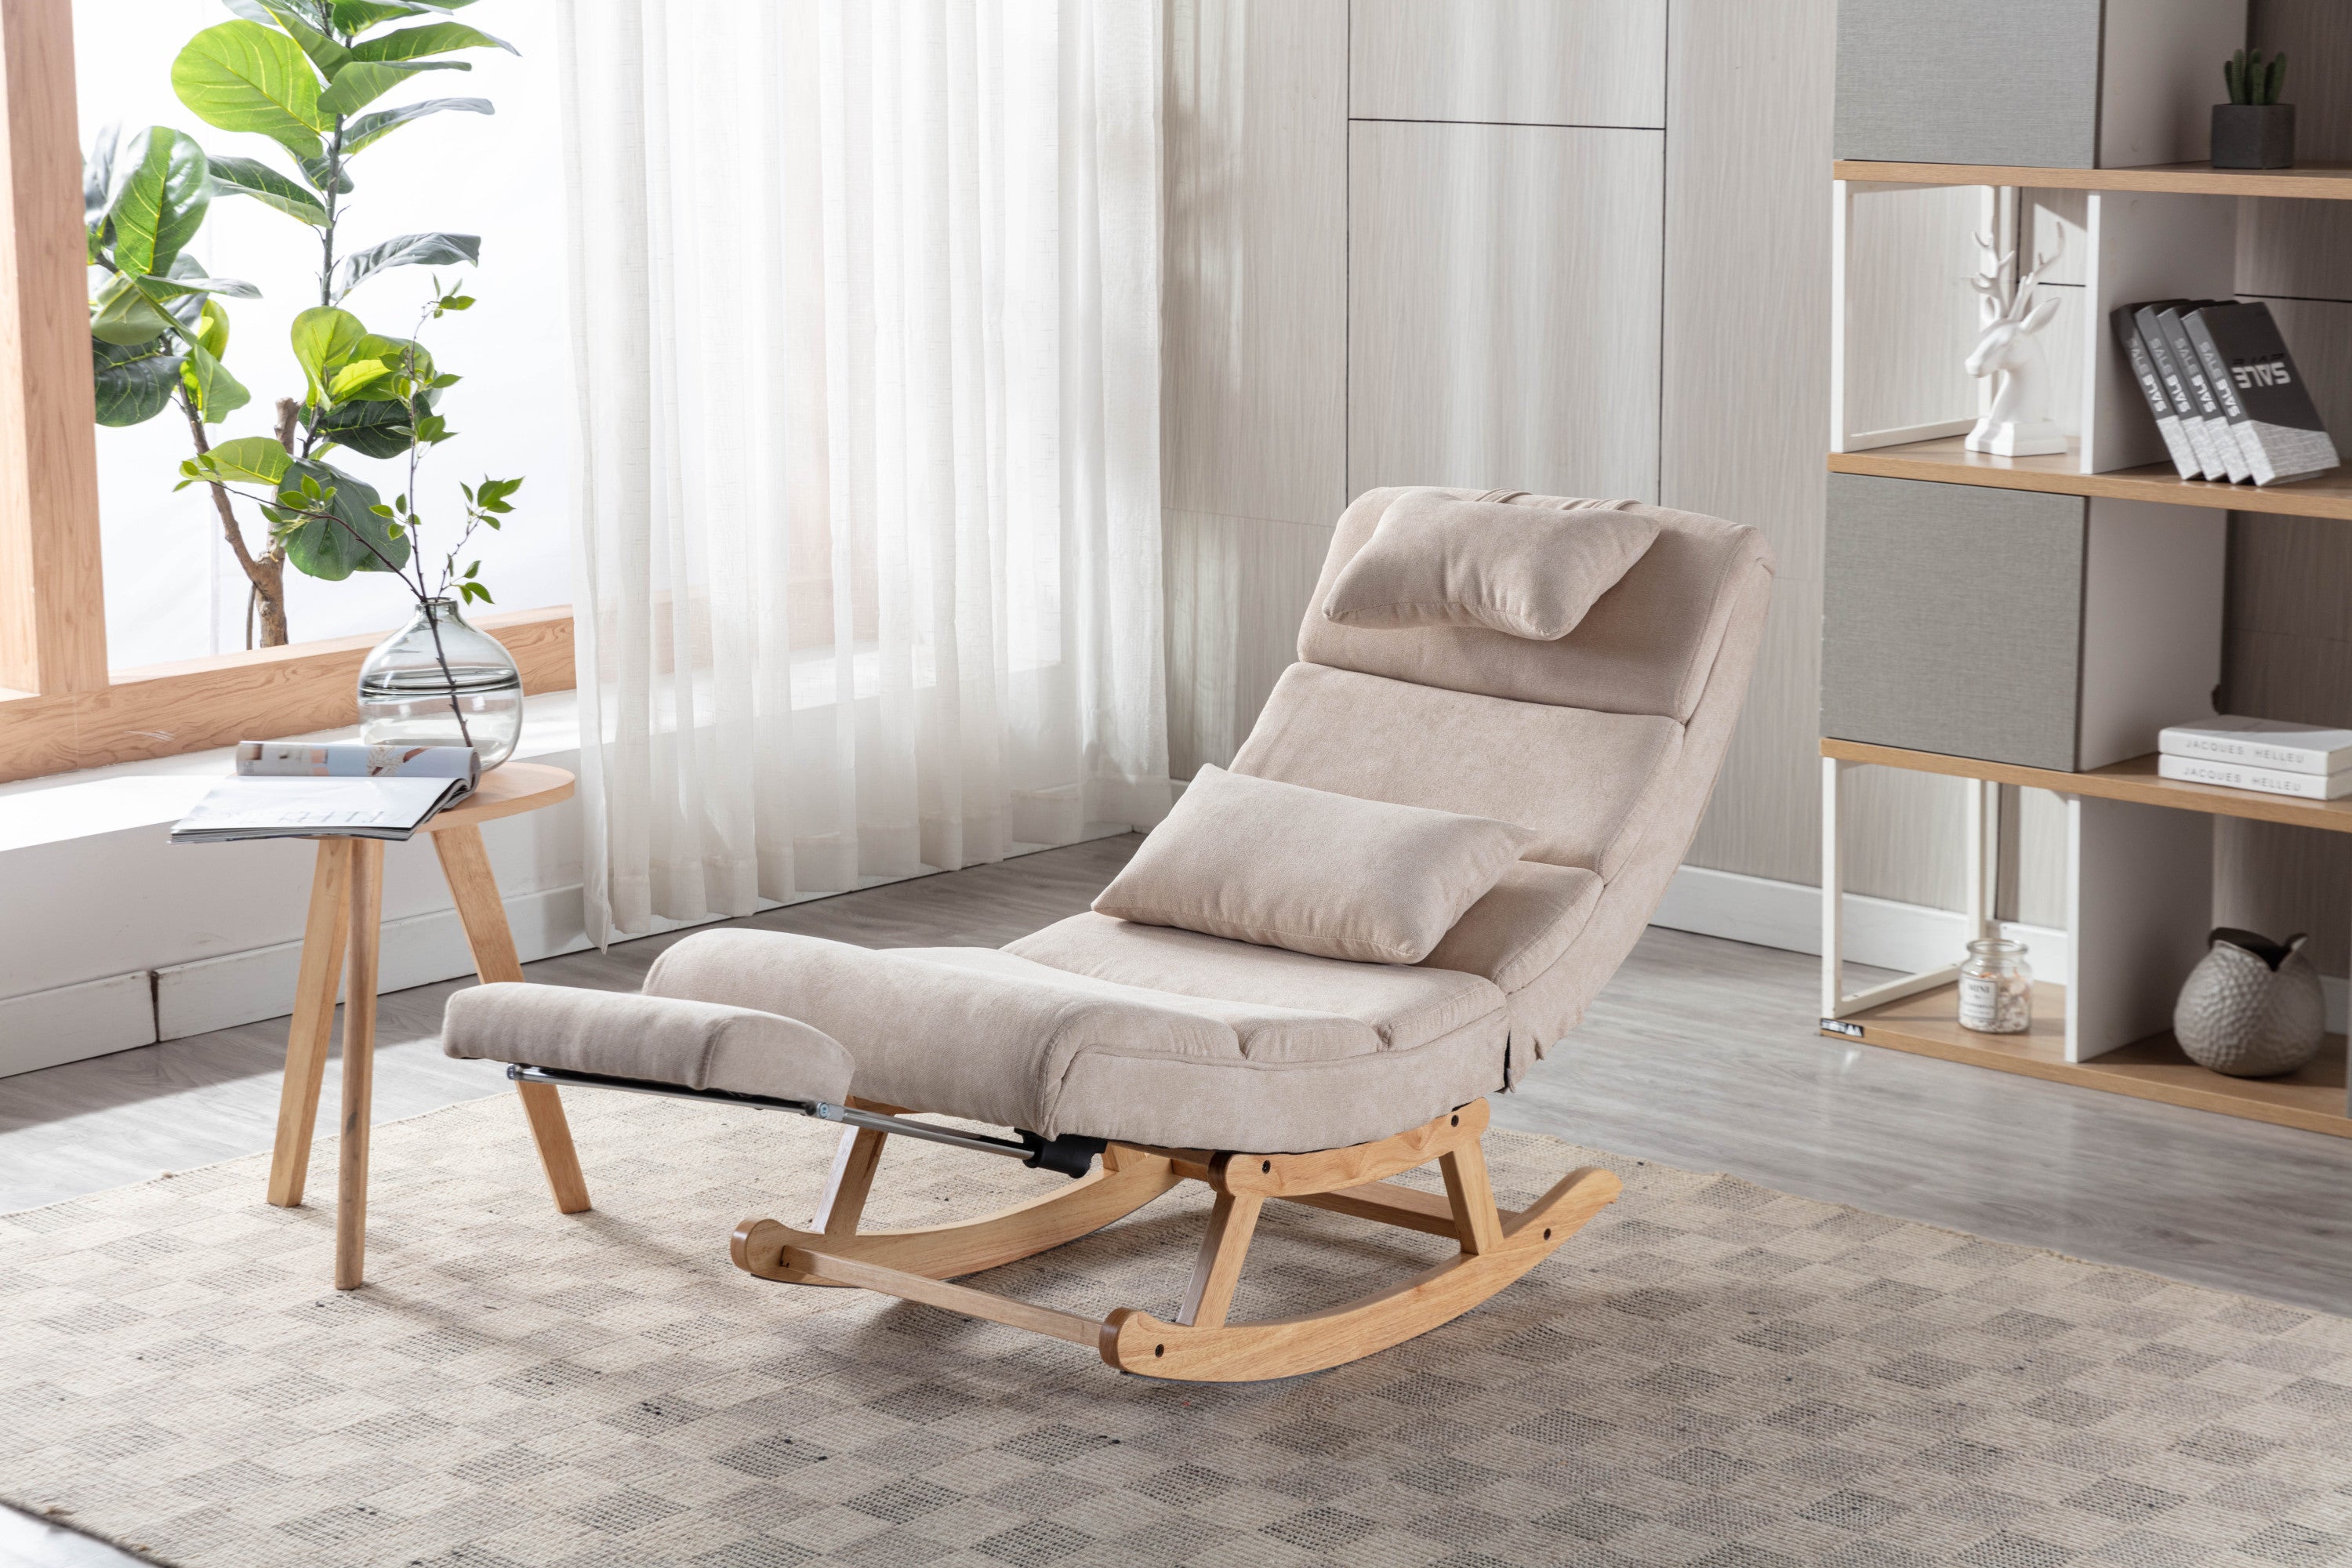 51.37"W Comfortable Rocking Chair with Natural Solid Rubber Wood Legs, Beige